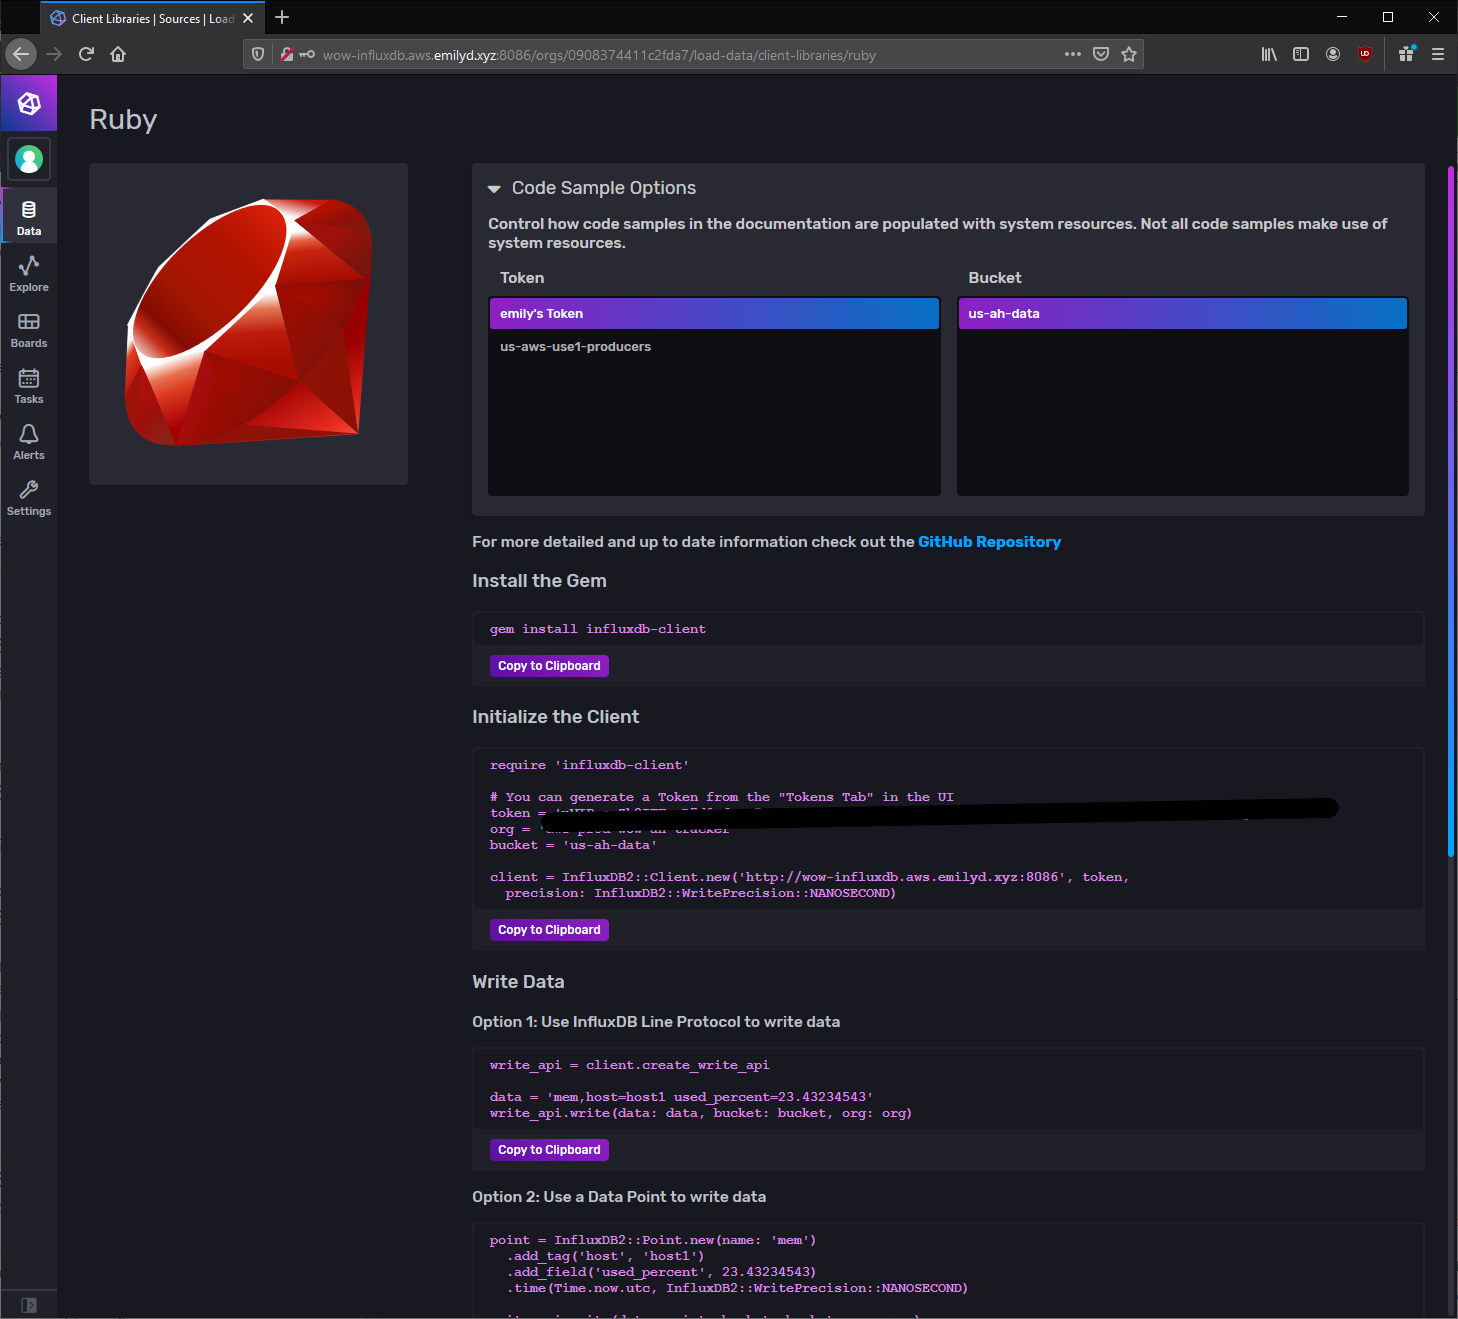 InfluxDB example code generated for Ruby within the web interface